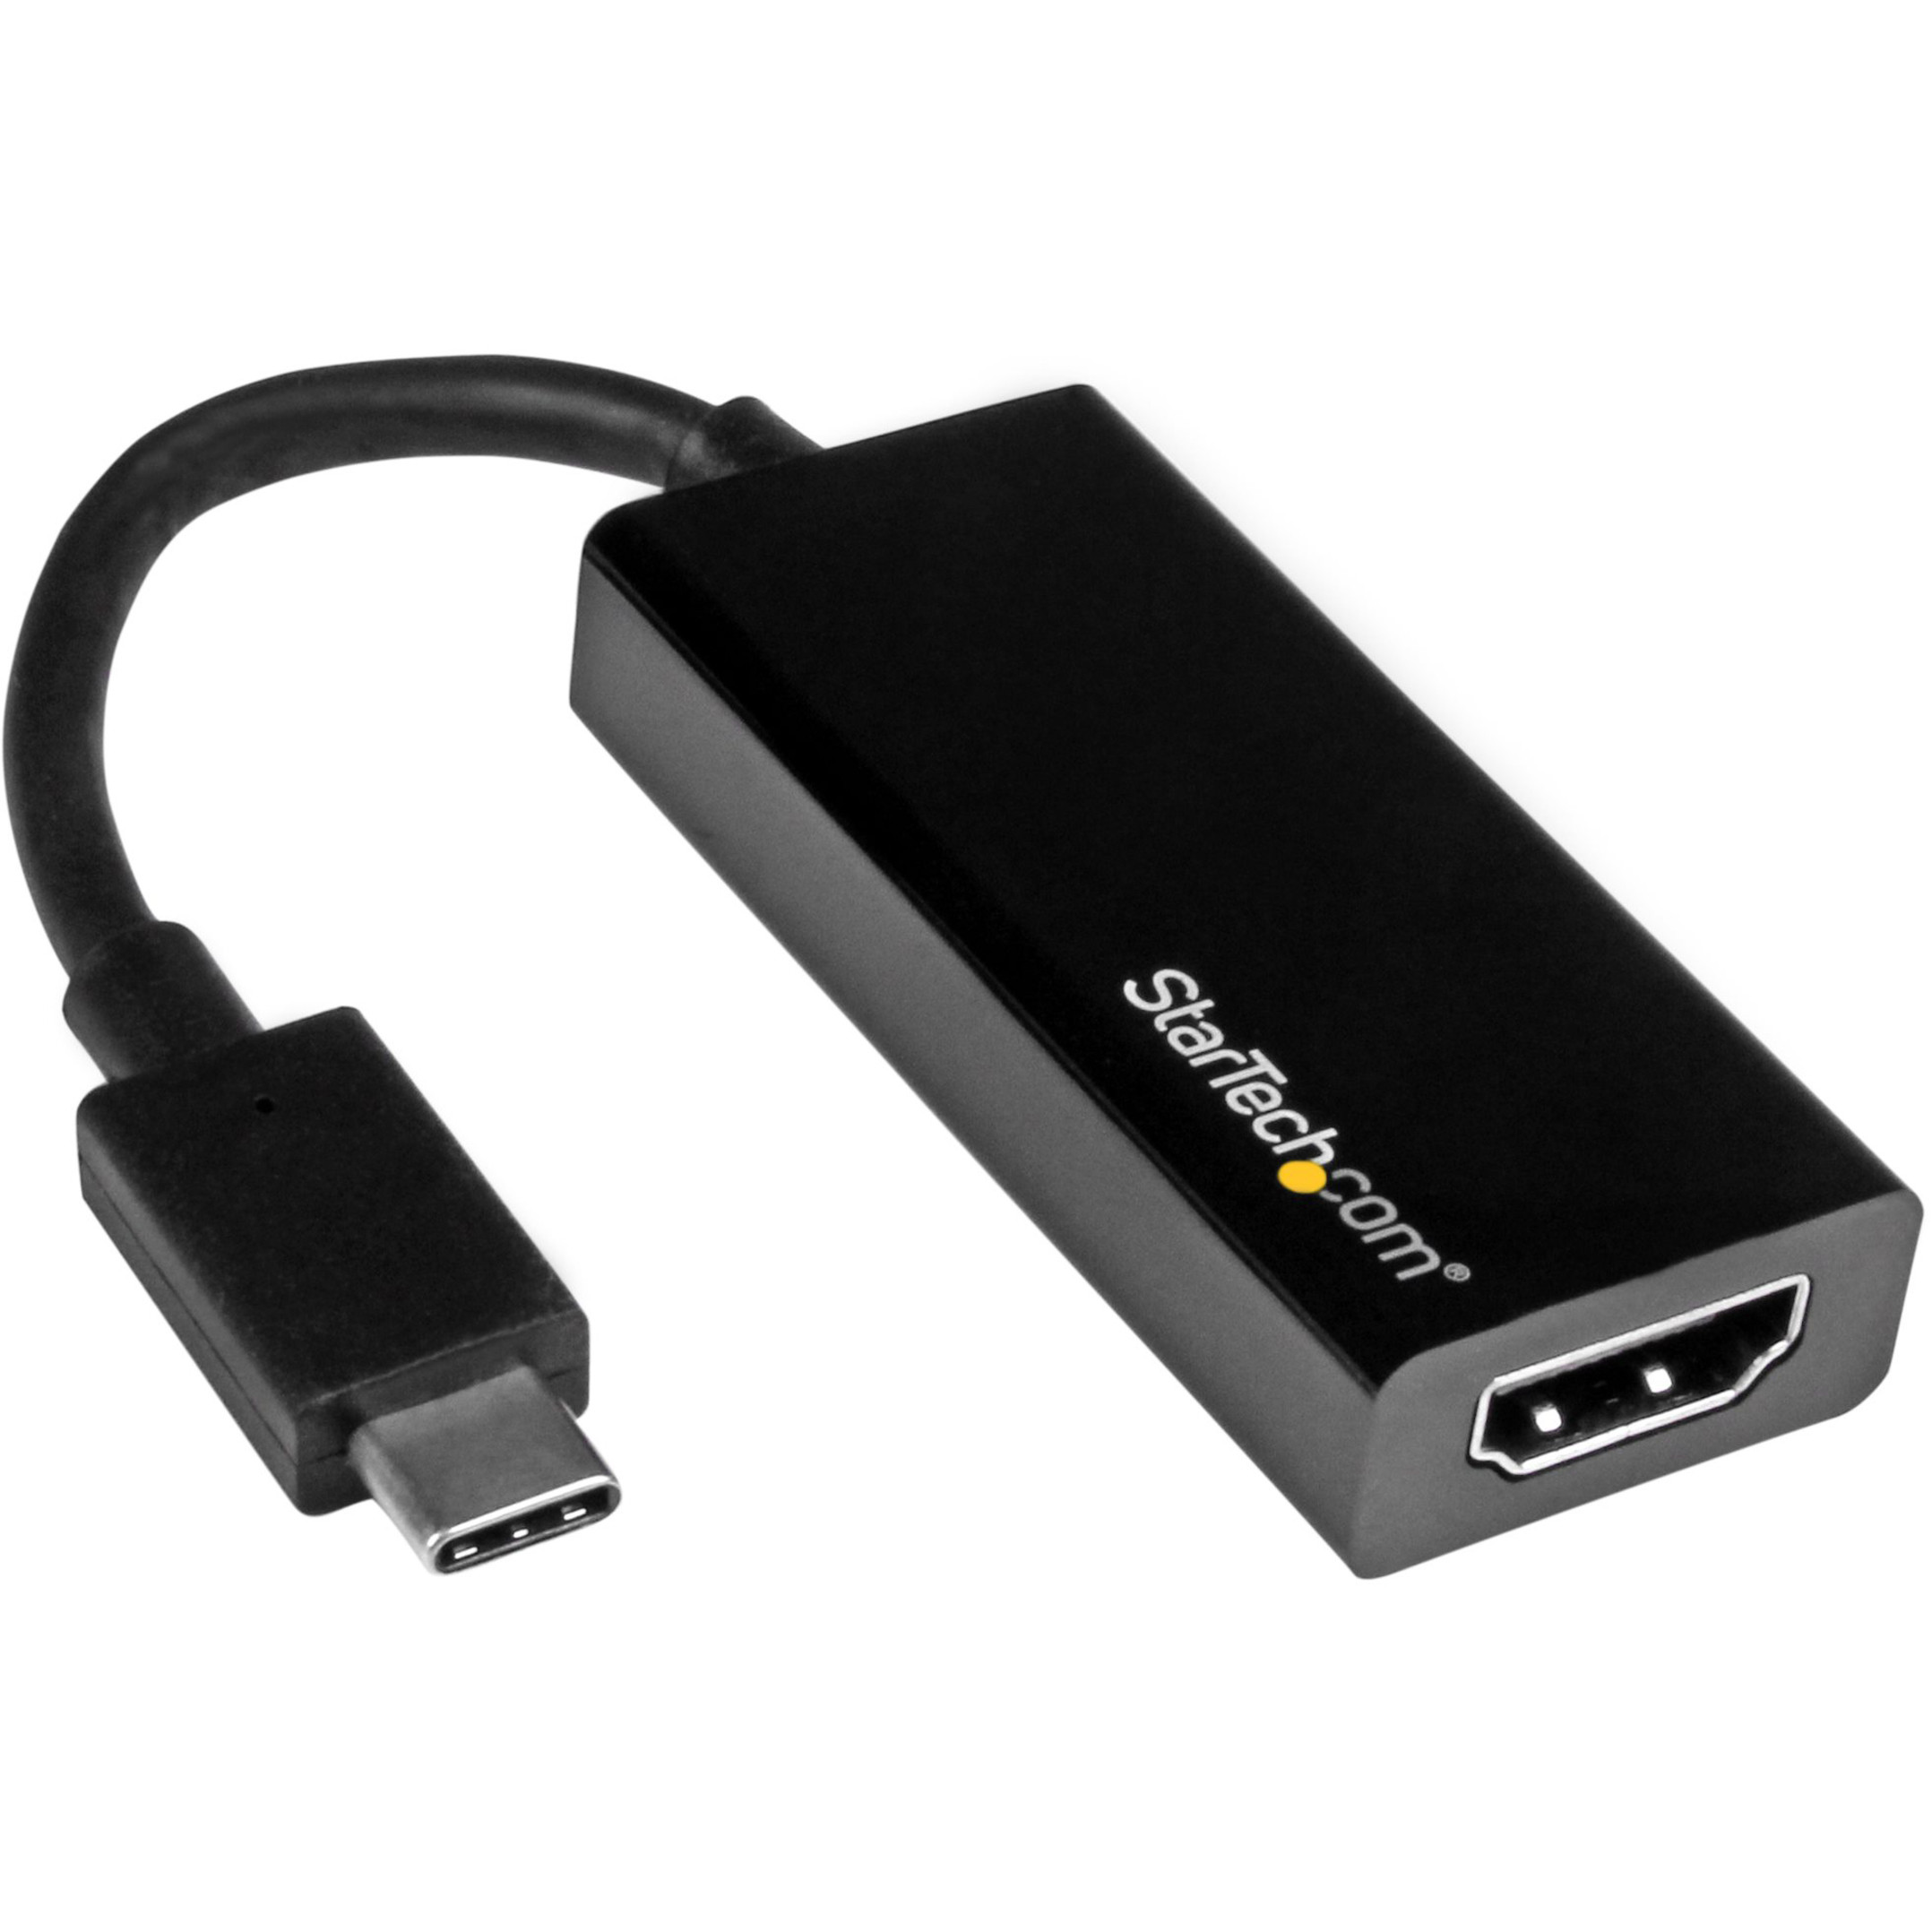 Startech .comUSB-C to HDMI Adapter4K 30HzBlackUSB Type-C to HDMI AdapterUSB 3.1Thunderbolt 3 CompatibleUSB C to HDMI adapter… CDP2HD